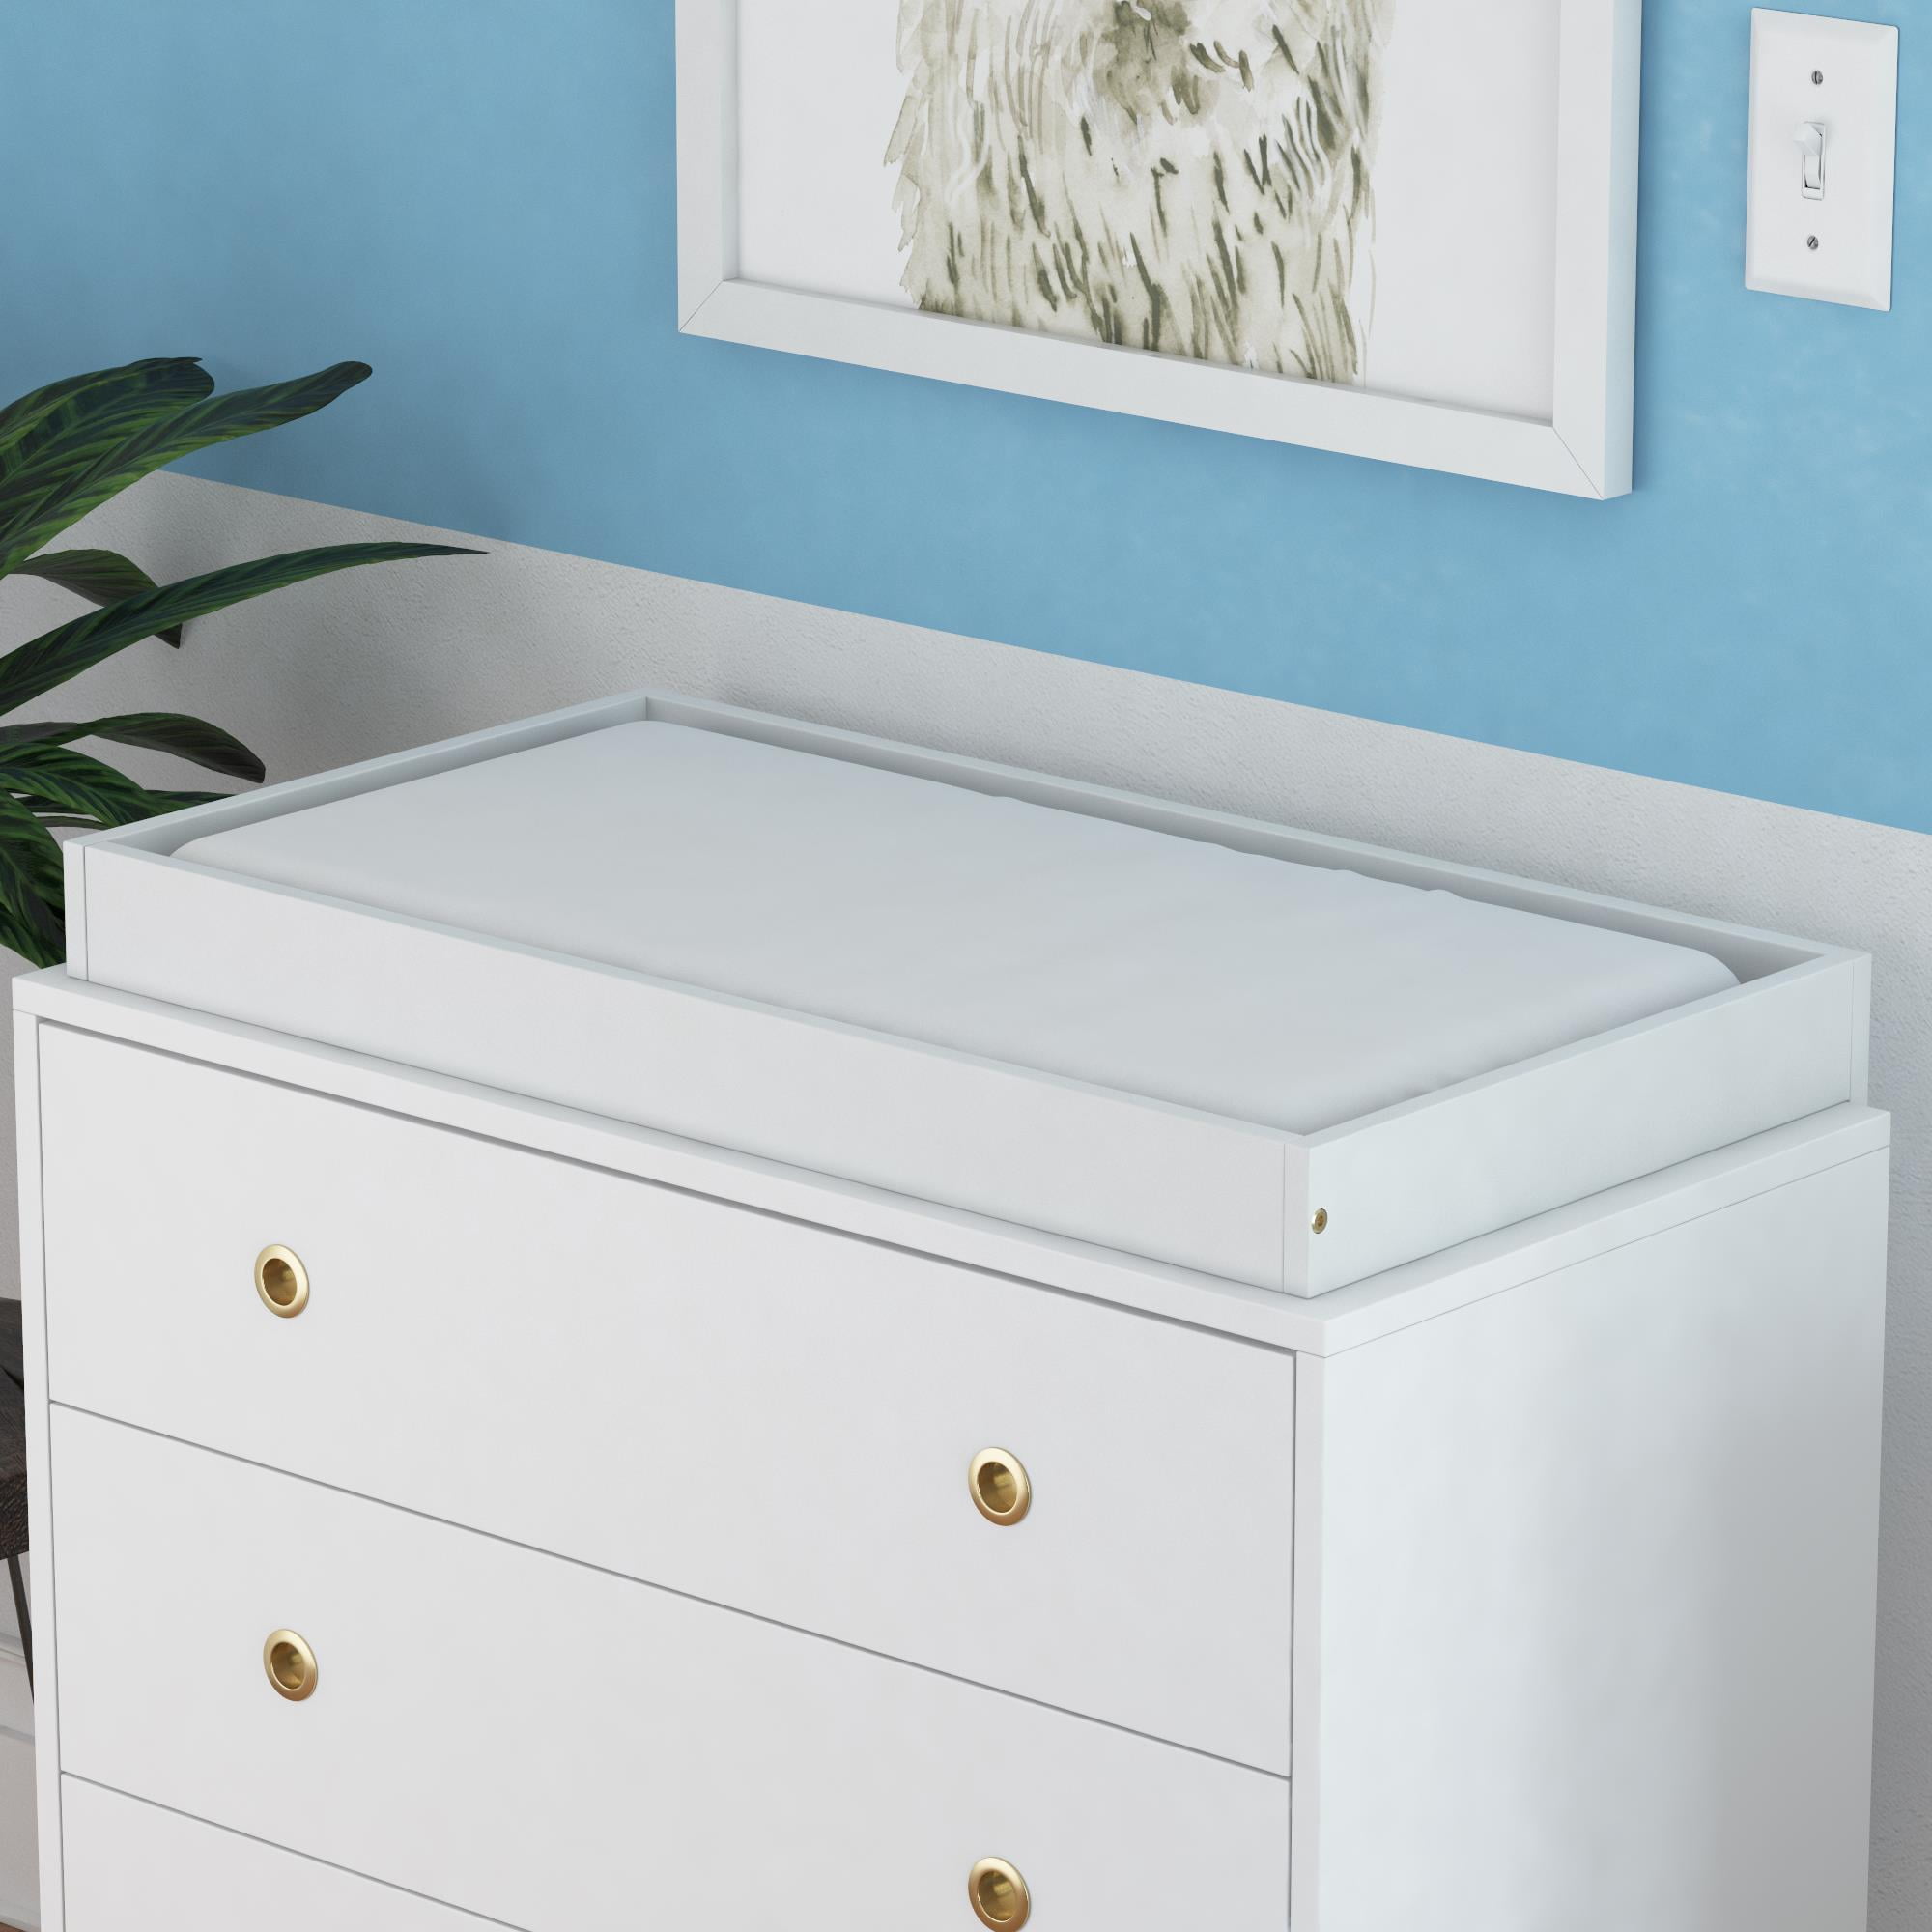 turning a dresser into a changing table